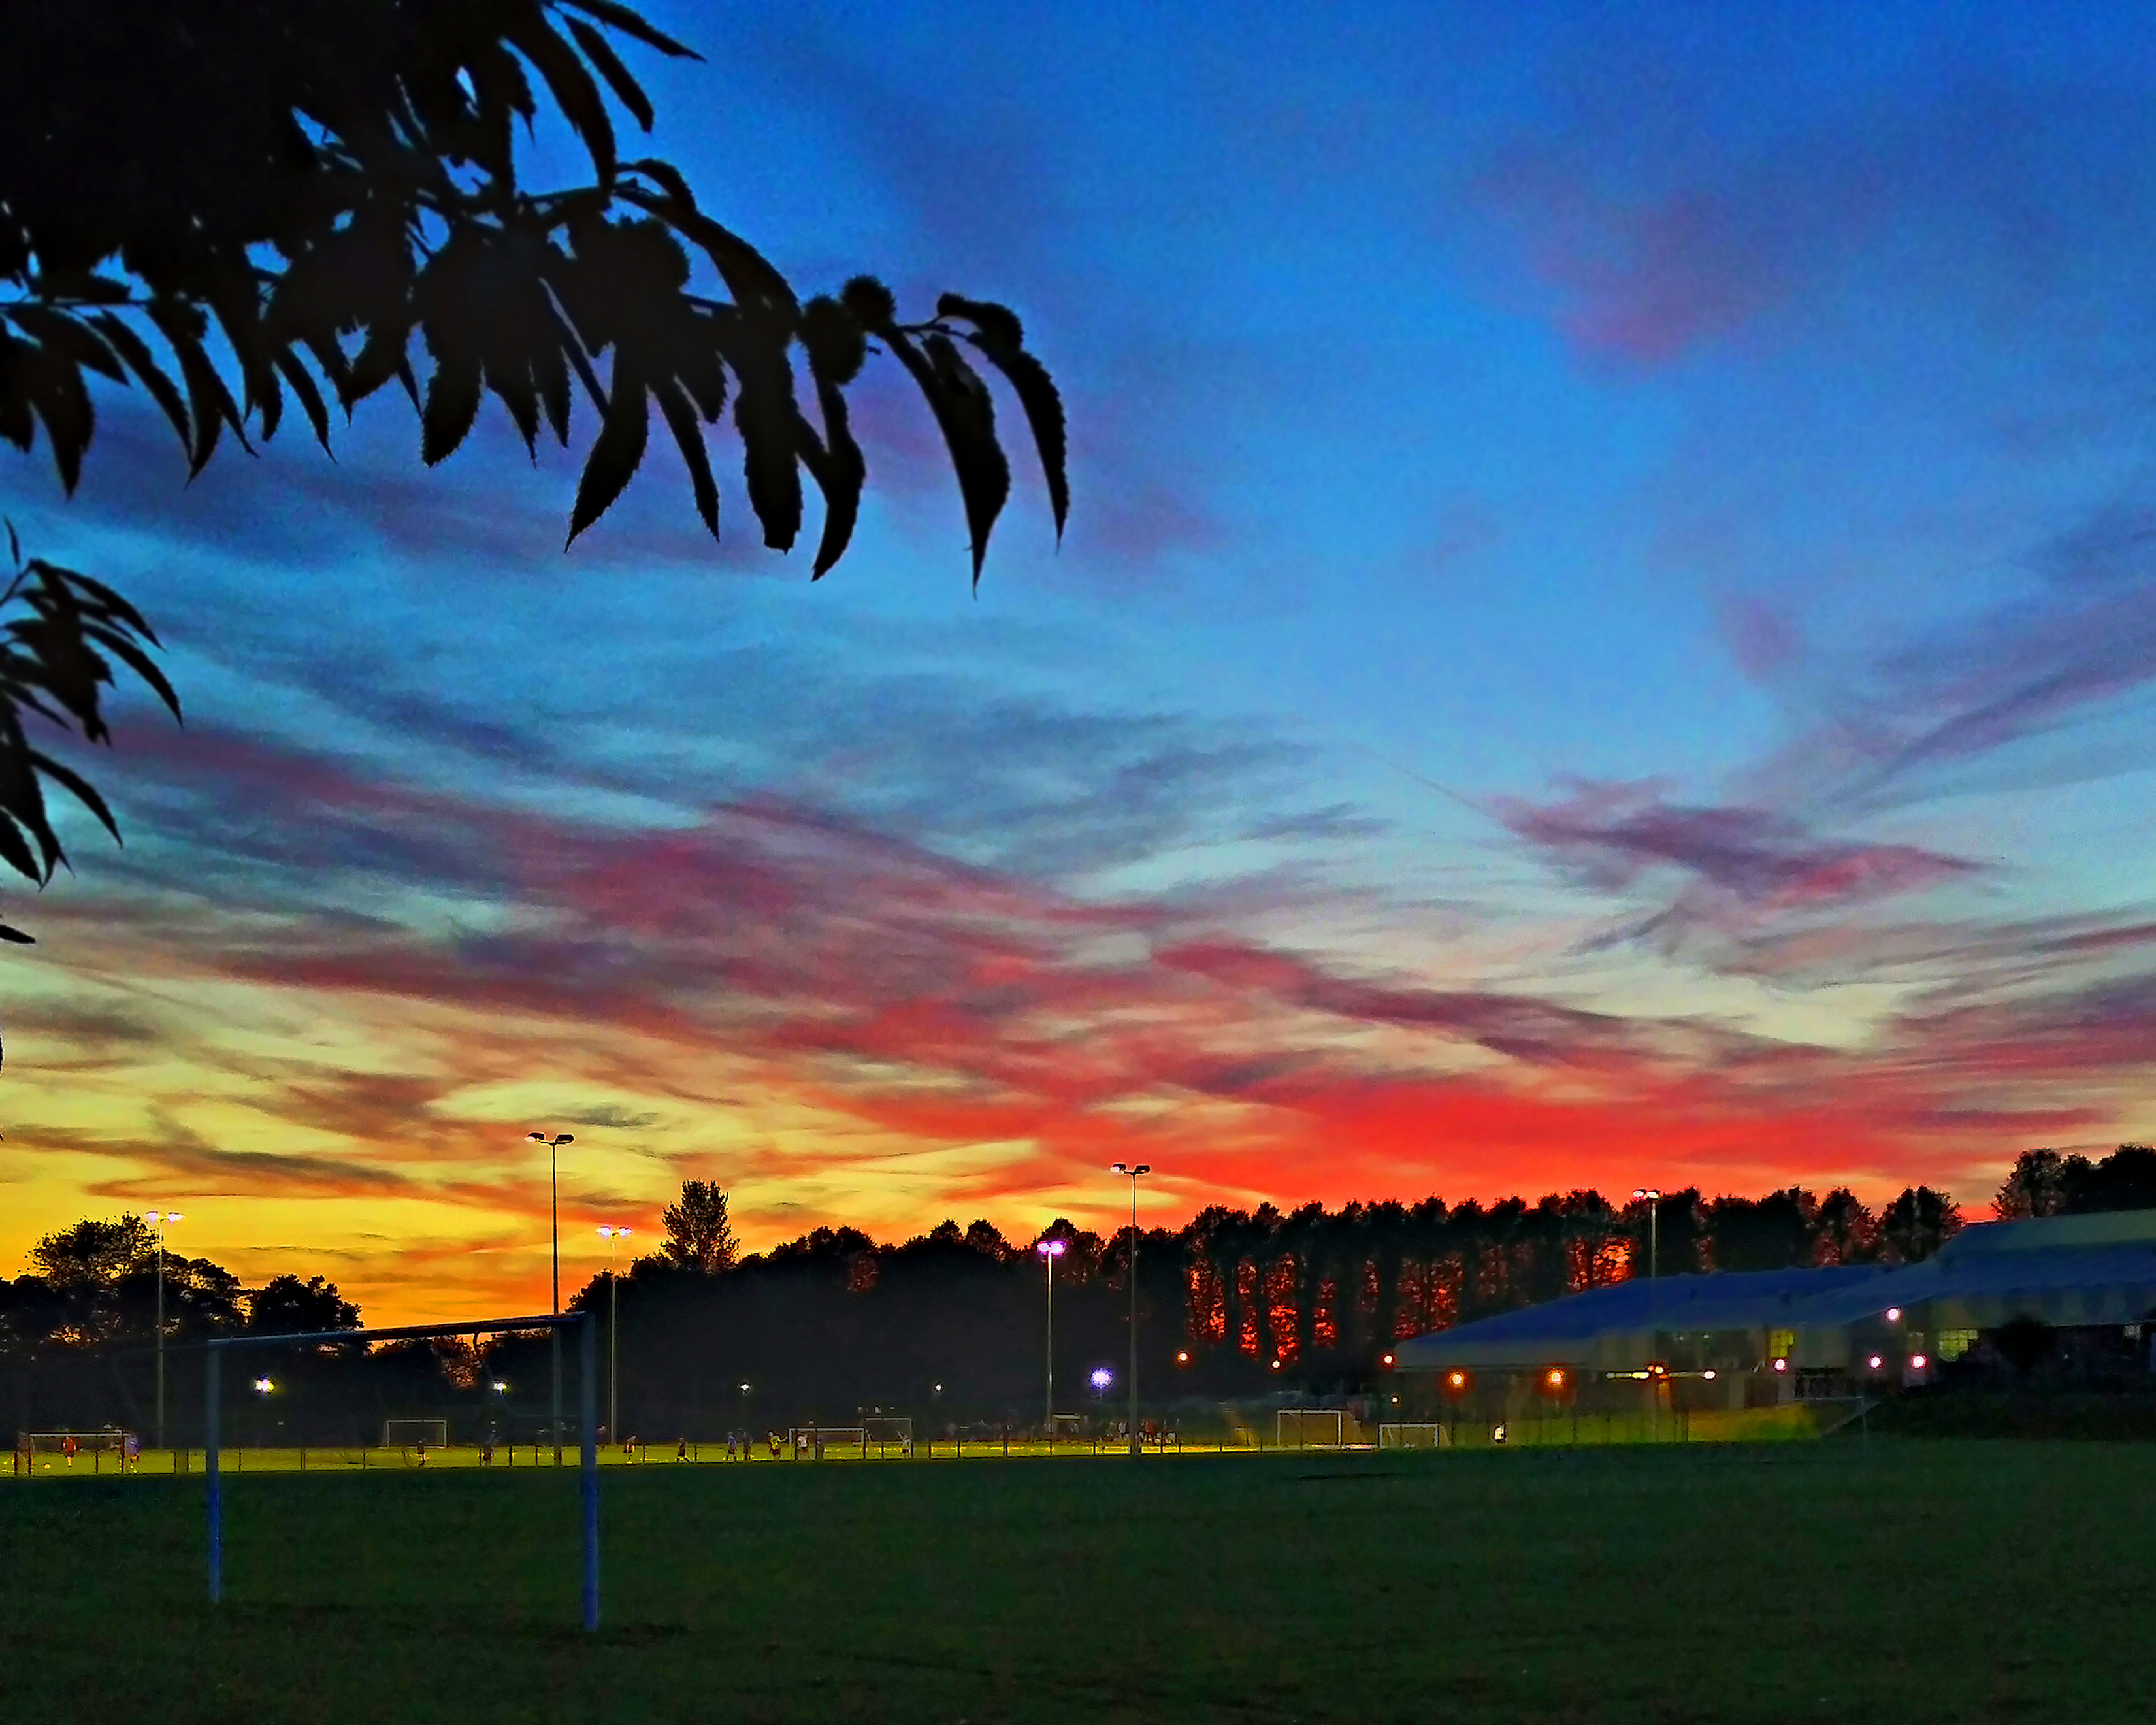 Sunset at Victoria Pleasure Ground during football practice